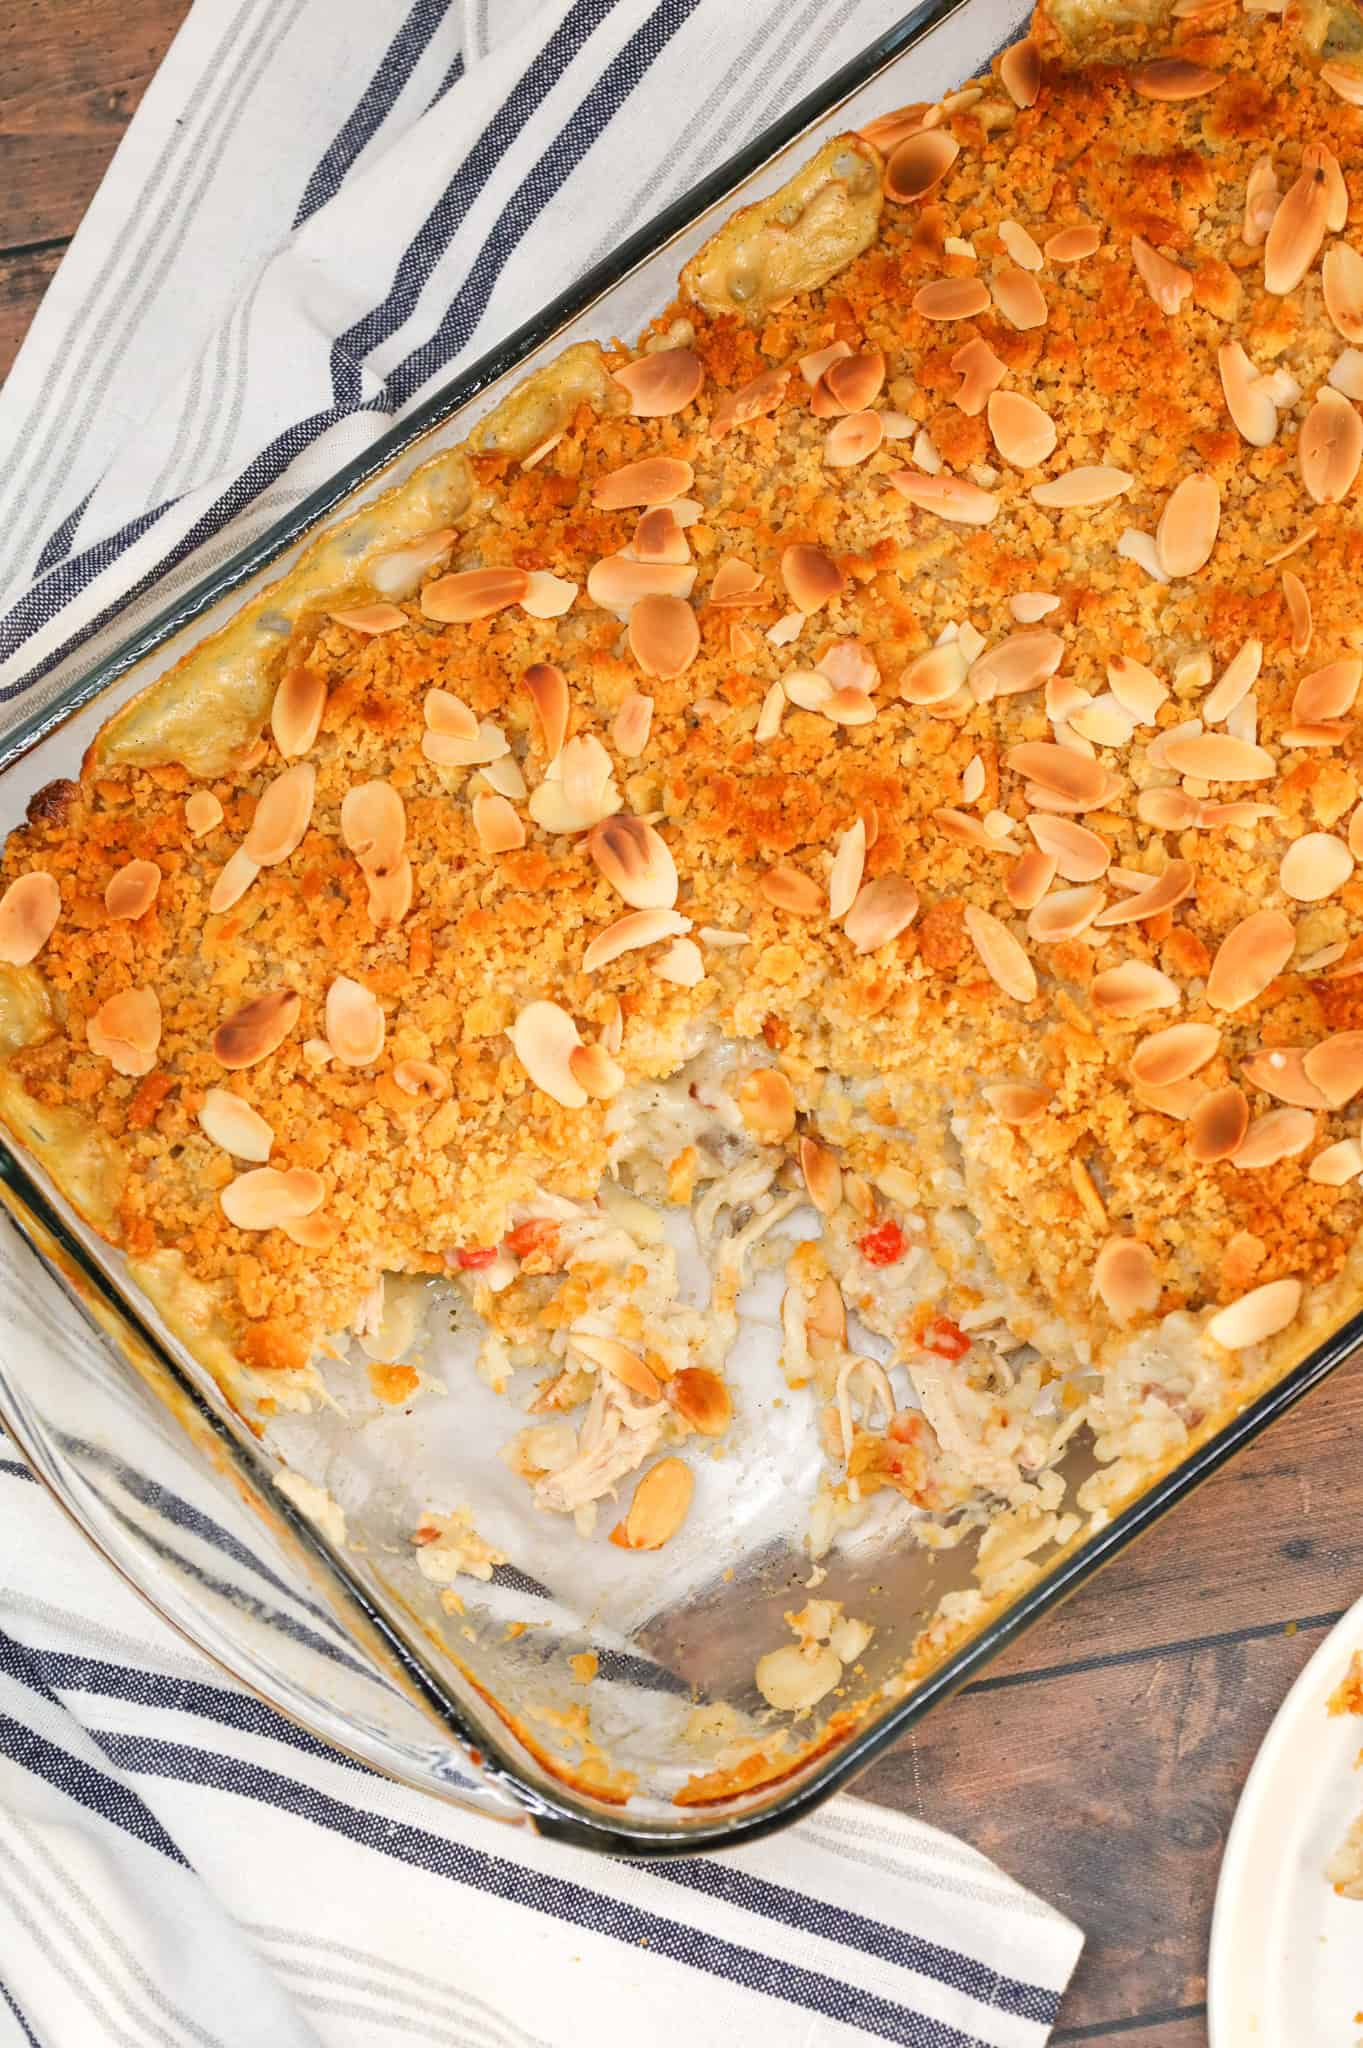 Water Chestnut Chicken and Rice Casserole is a hearty chicken casserole loaded with shredded rotisserie chicken, water chestnuts, almonds, pimentos and instant rice all topped with a buttery Ritz cracker crumb topping.